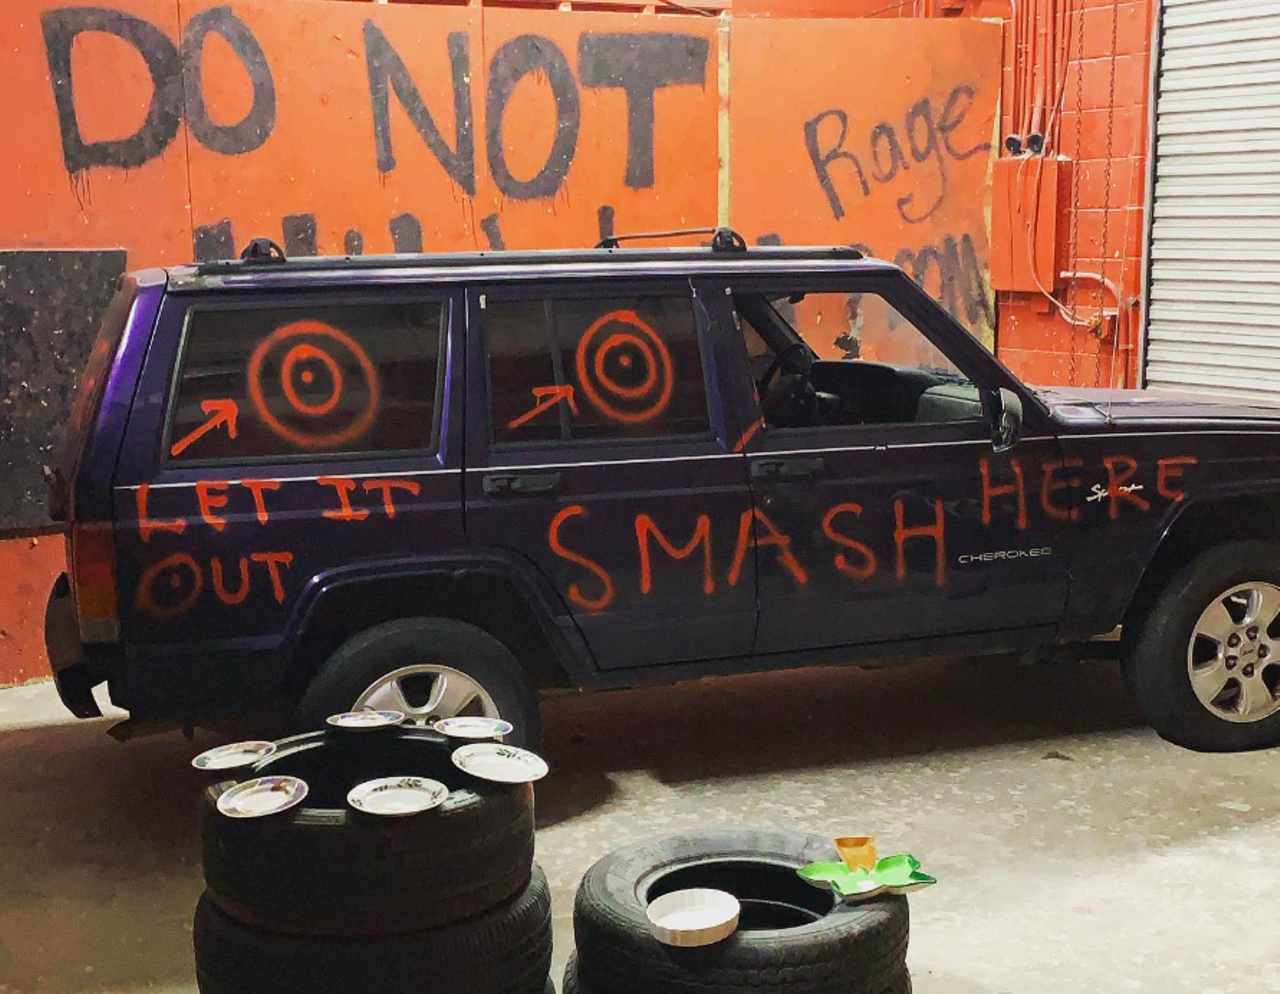 Smash stuff at Rage Room Orlando
4065 L.B. McLeod Road, Orlando
Rage Room Orlando is the perfect place to let off a little steam, vent out some pent-up aggression or just break things for the fun of it — all indoors!